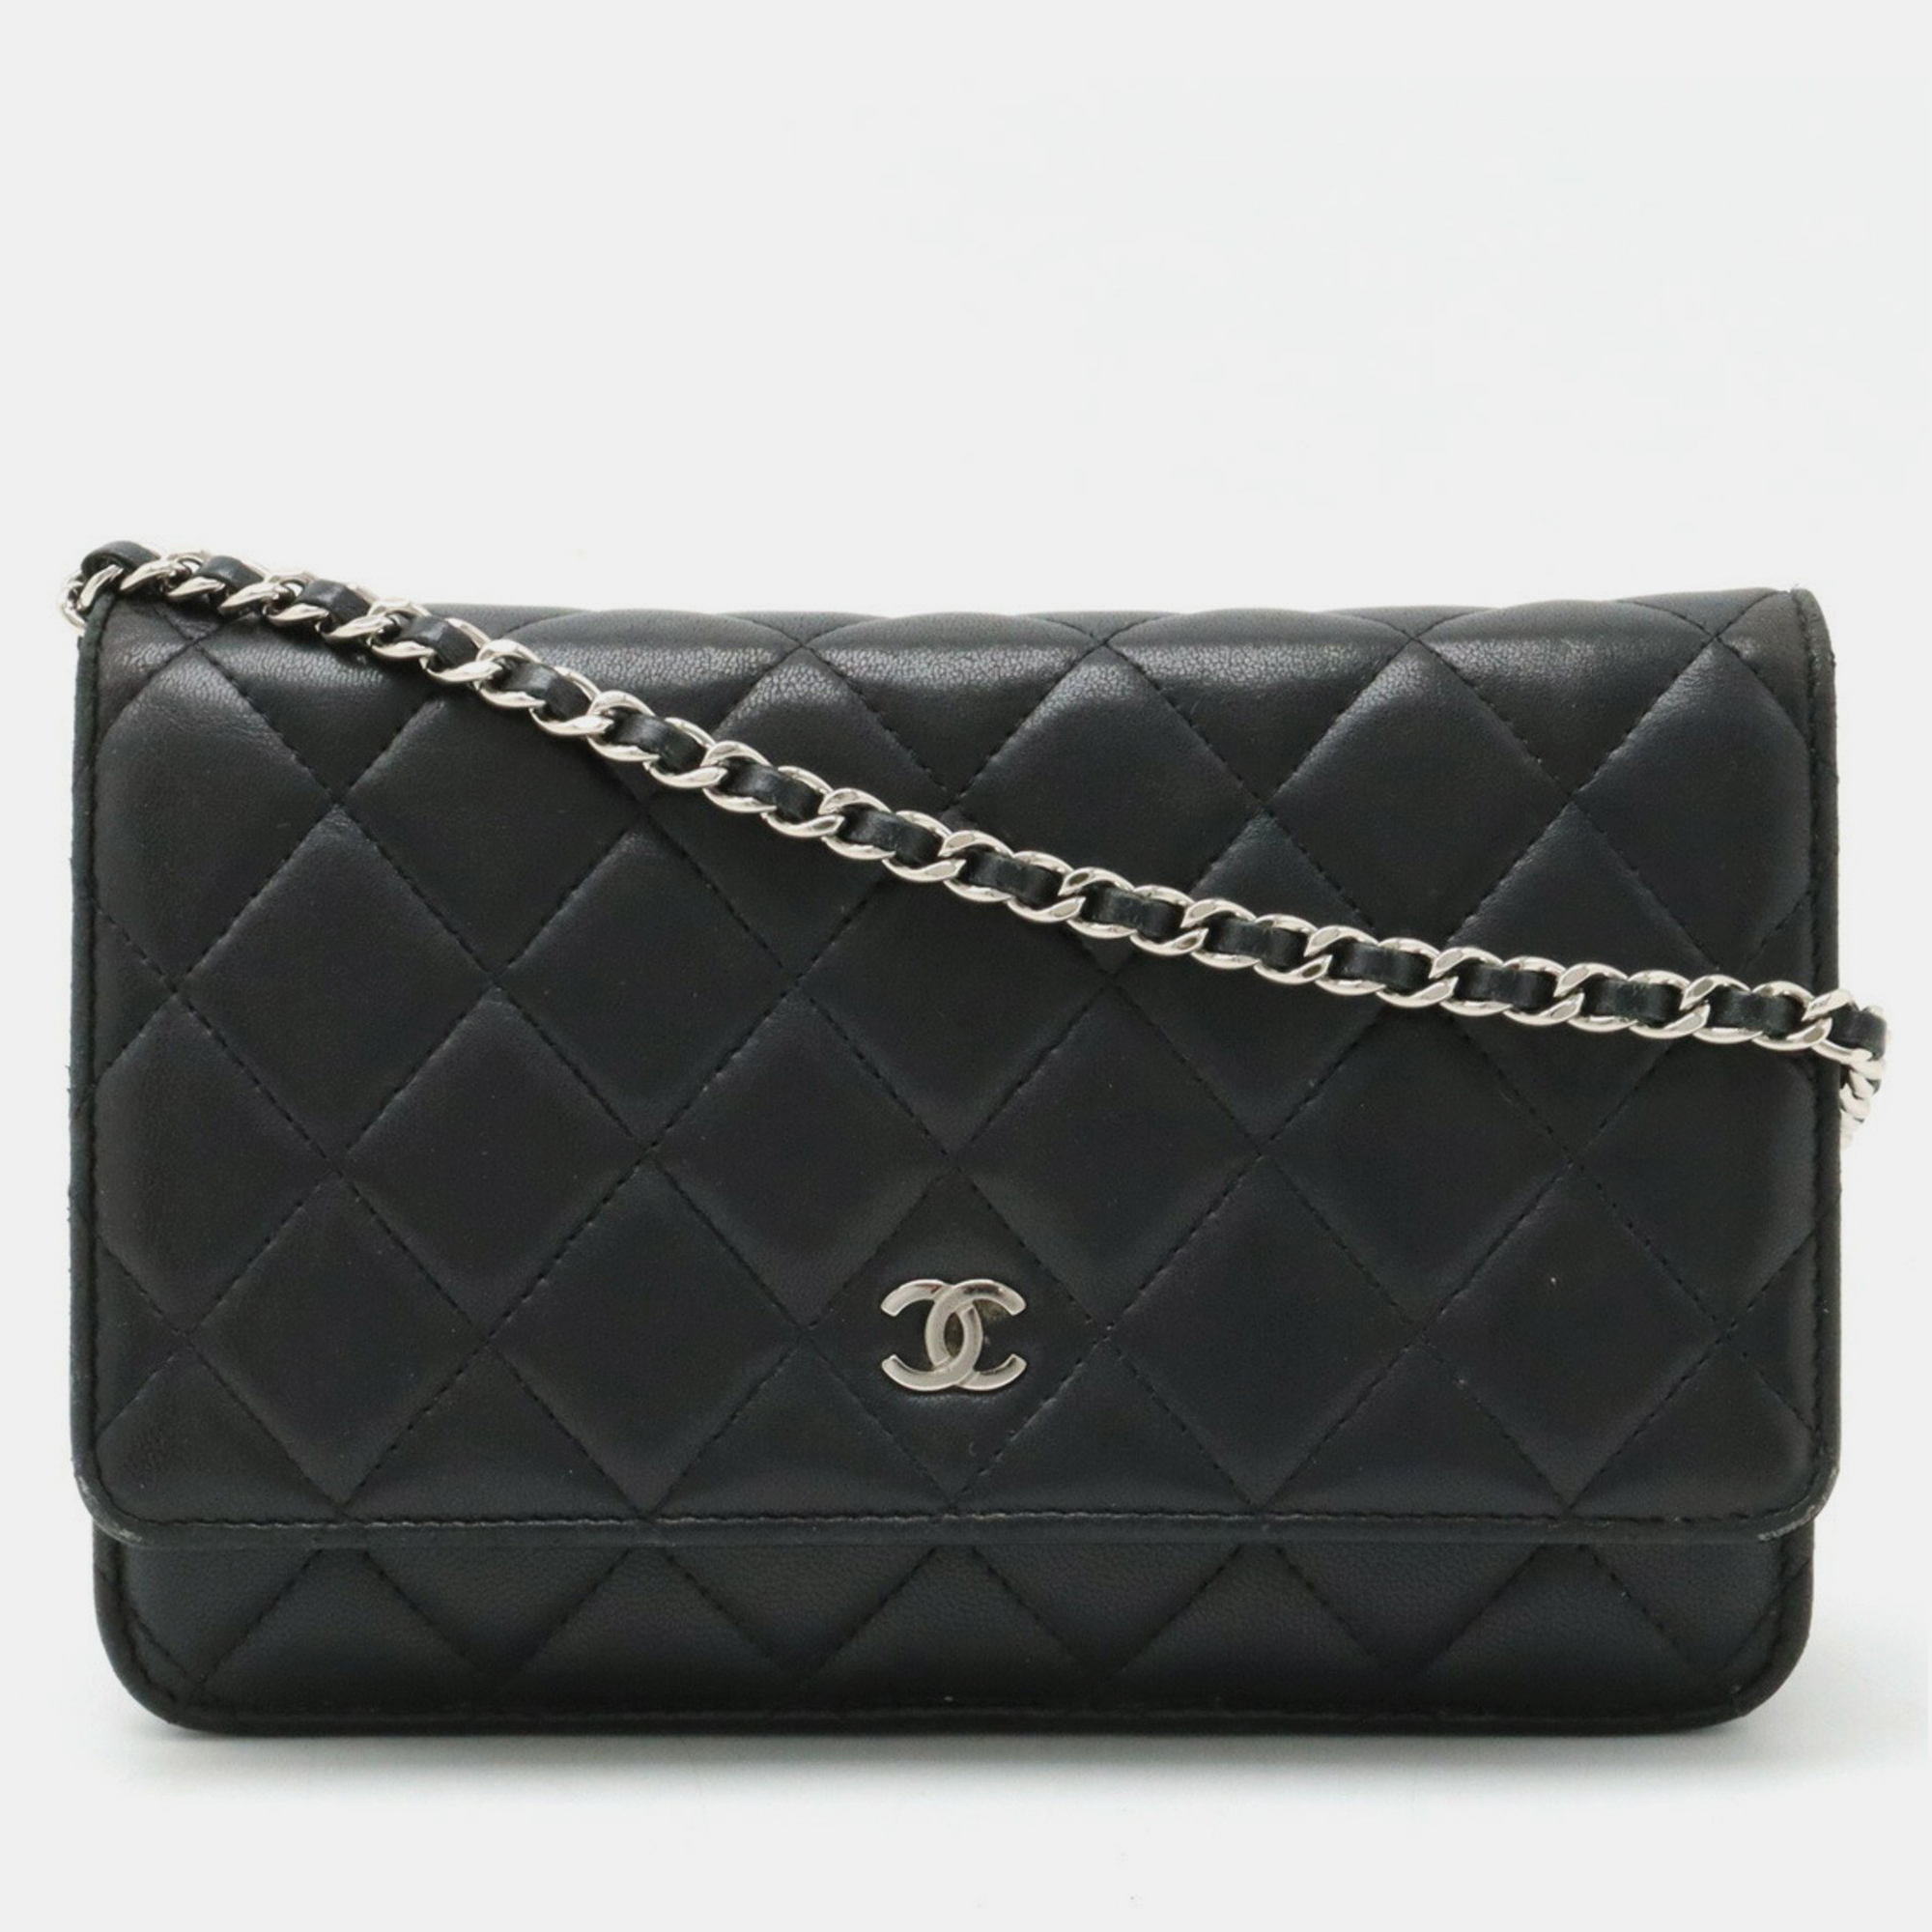 Chanel black leather quilted wallet on chain